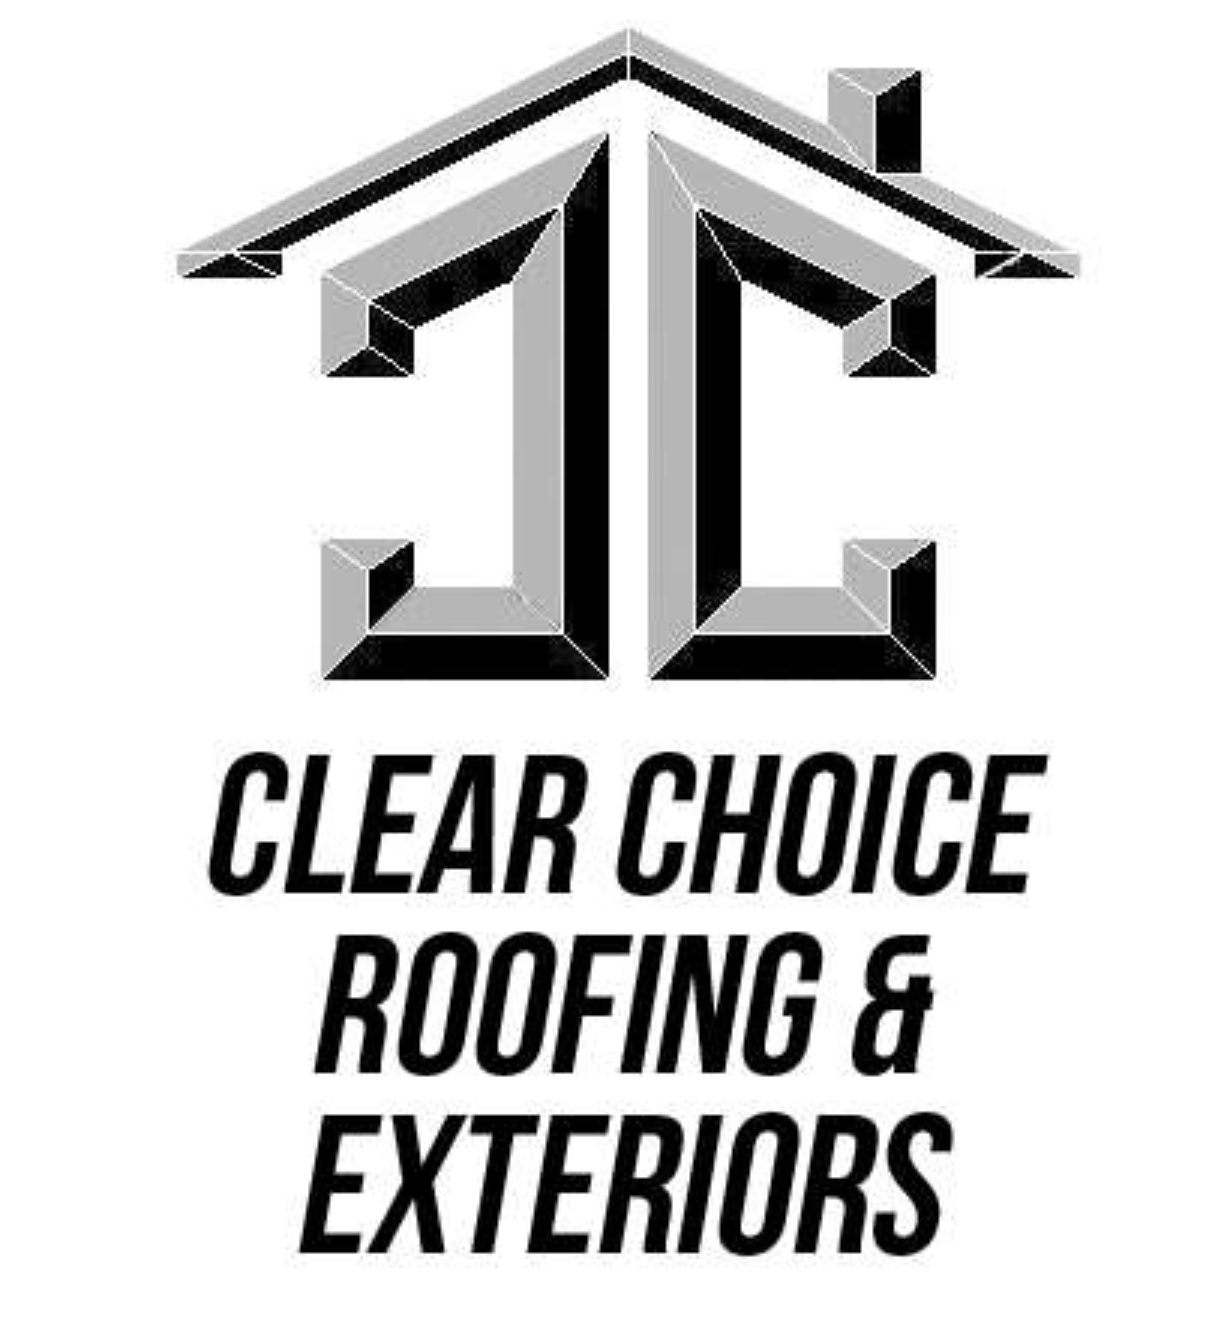 Clearchoice roofing and exteriors Siding Inspection Report - duplicate